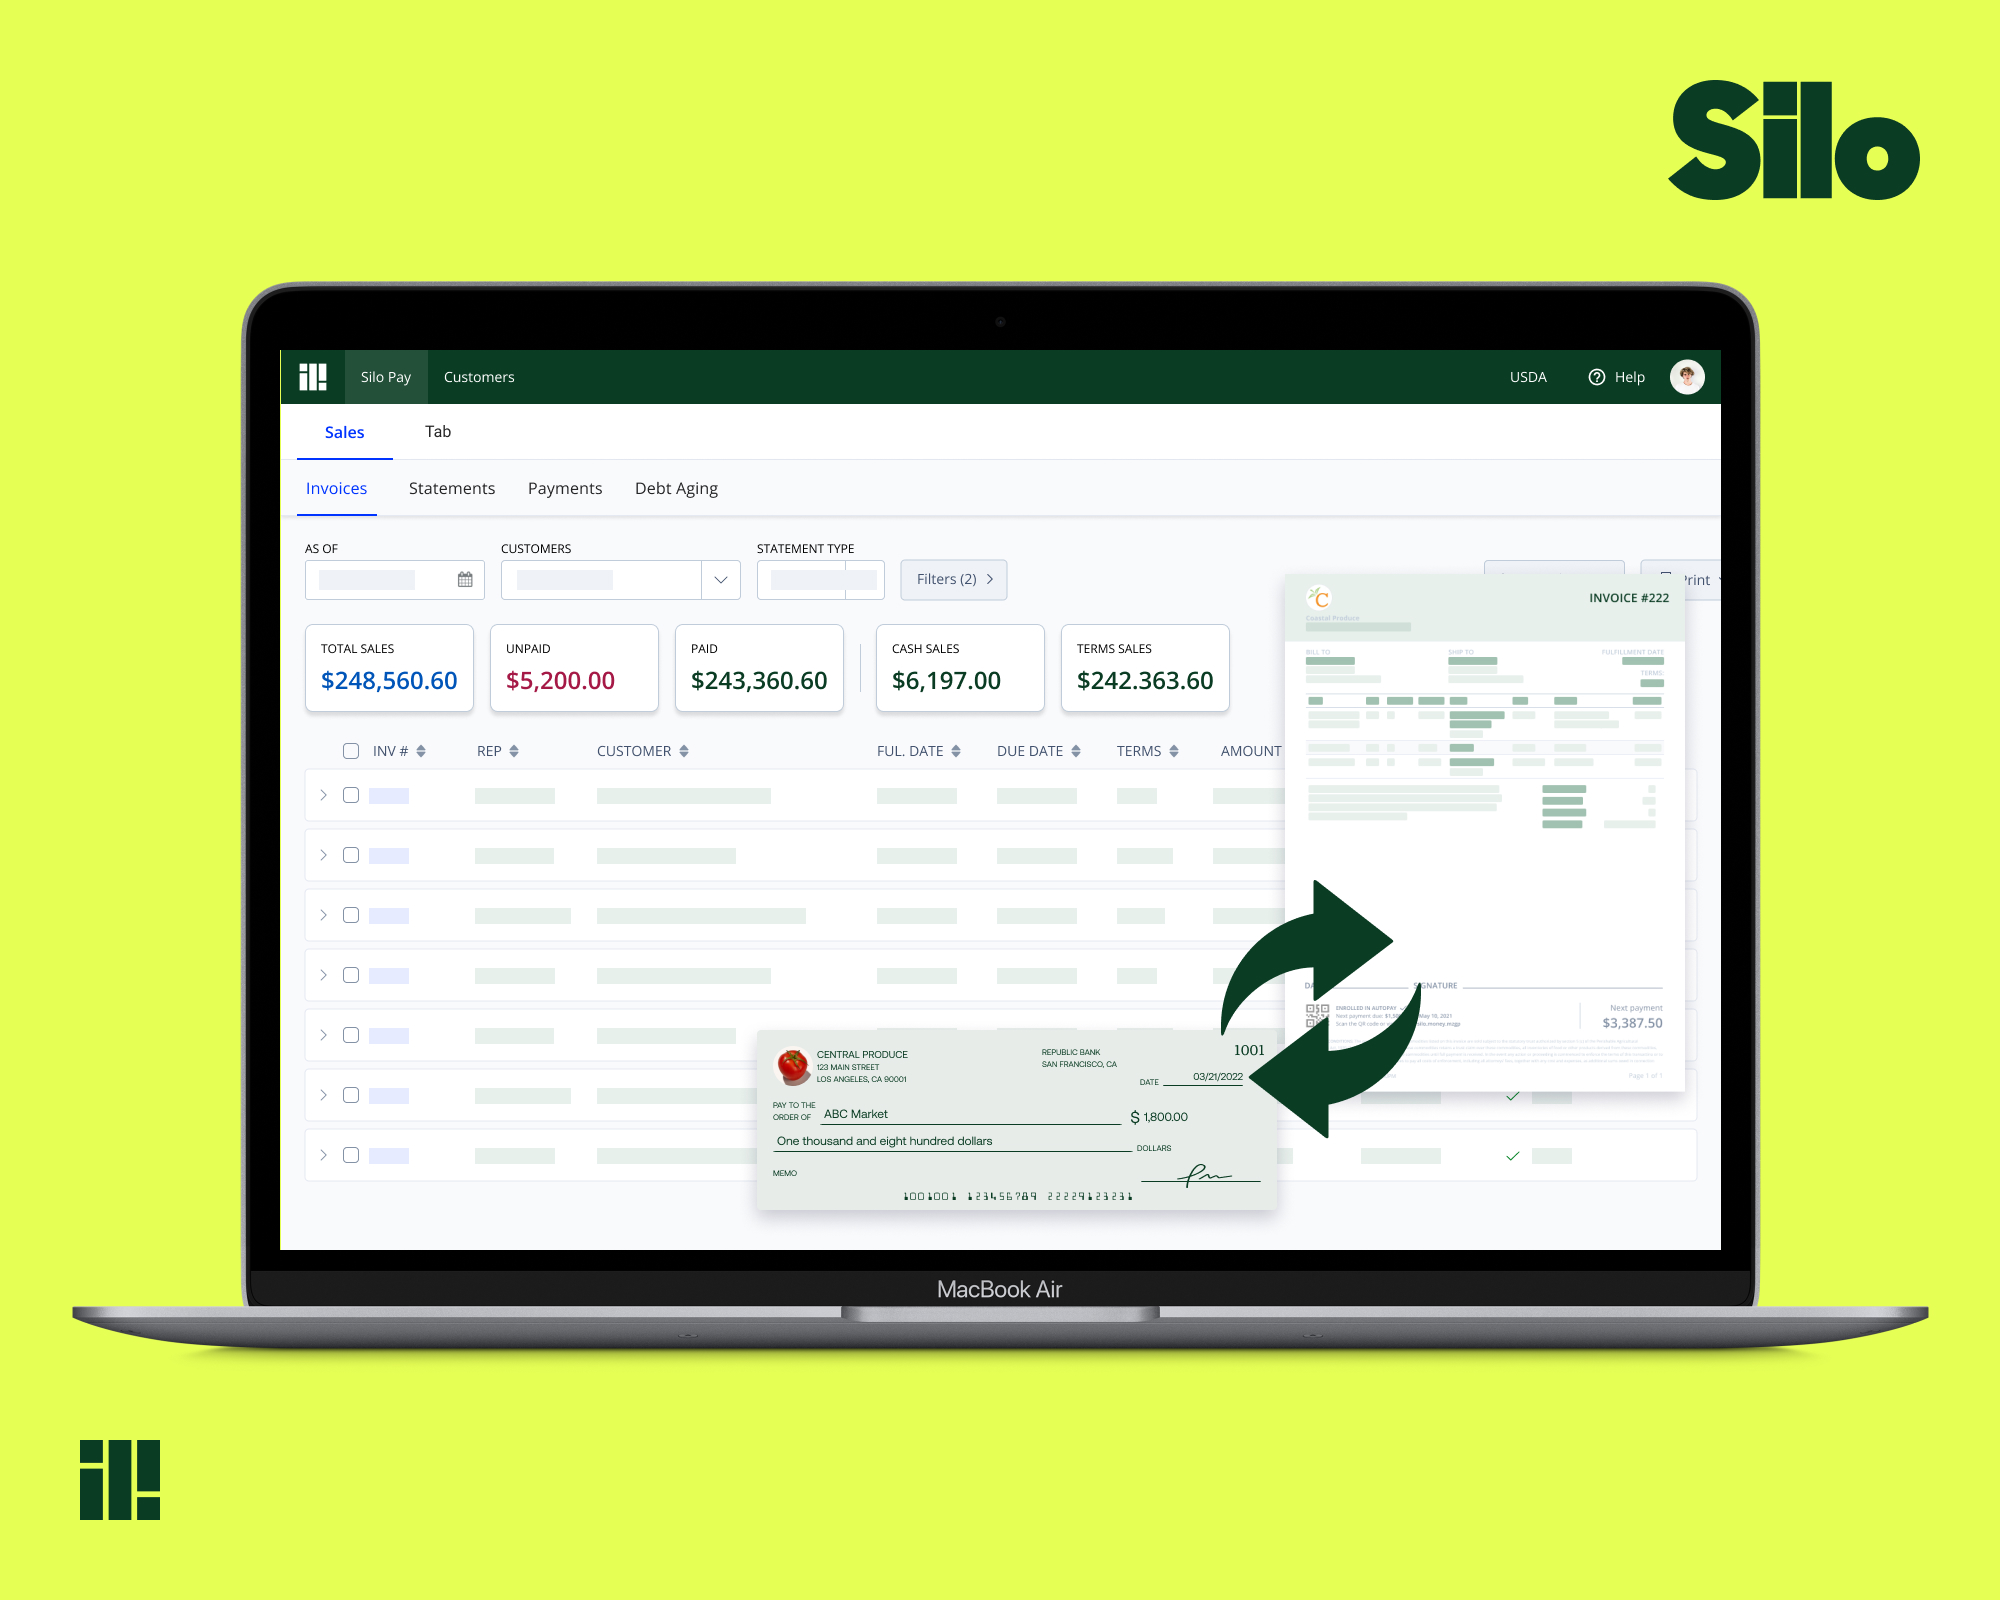 Silo makes billing and collections automated and simple.